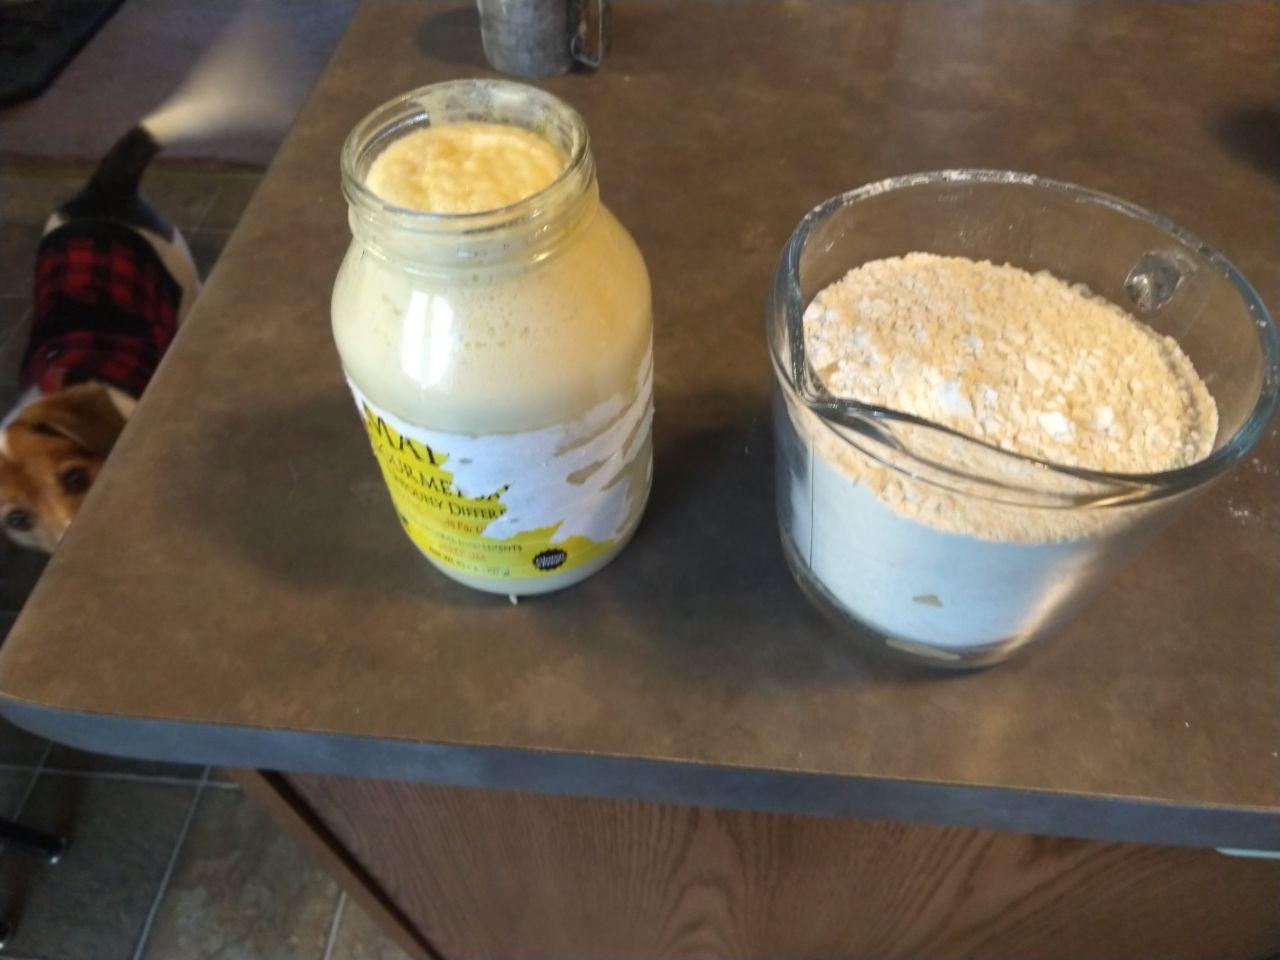 Dough starter mixed in a jar next to a measuring cup of flour.